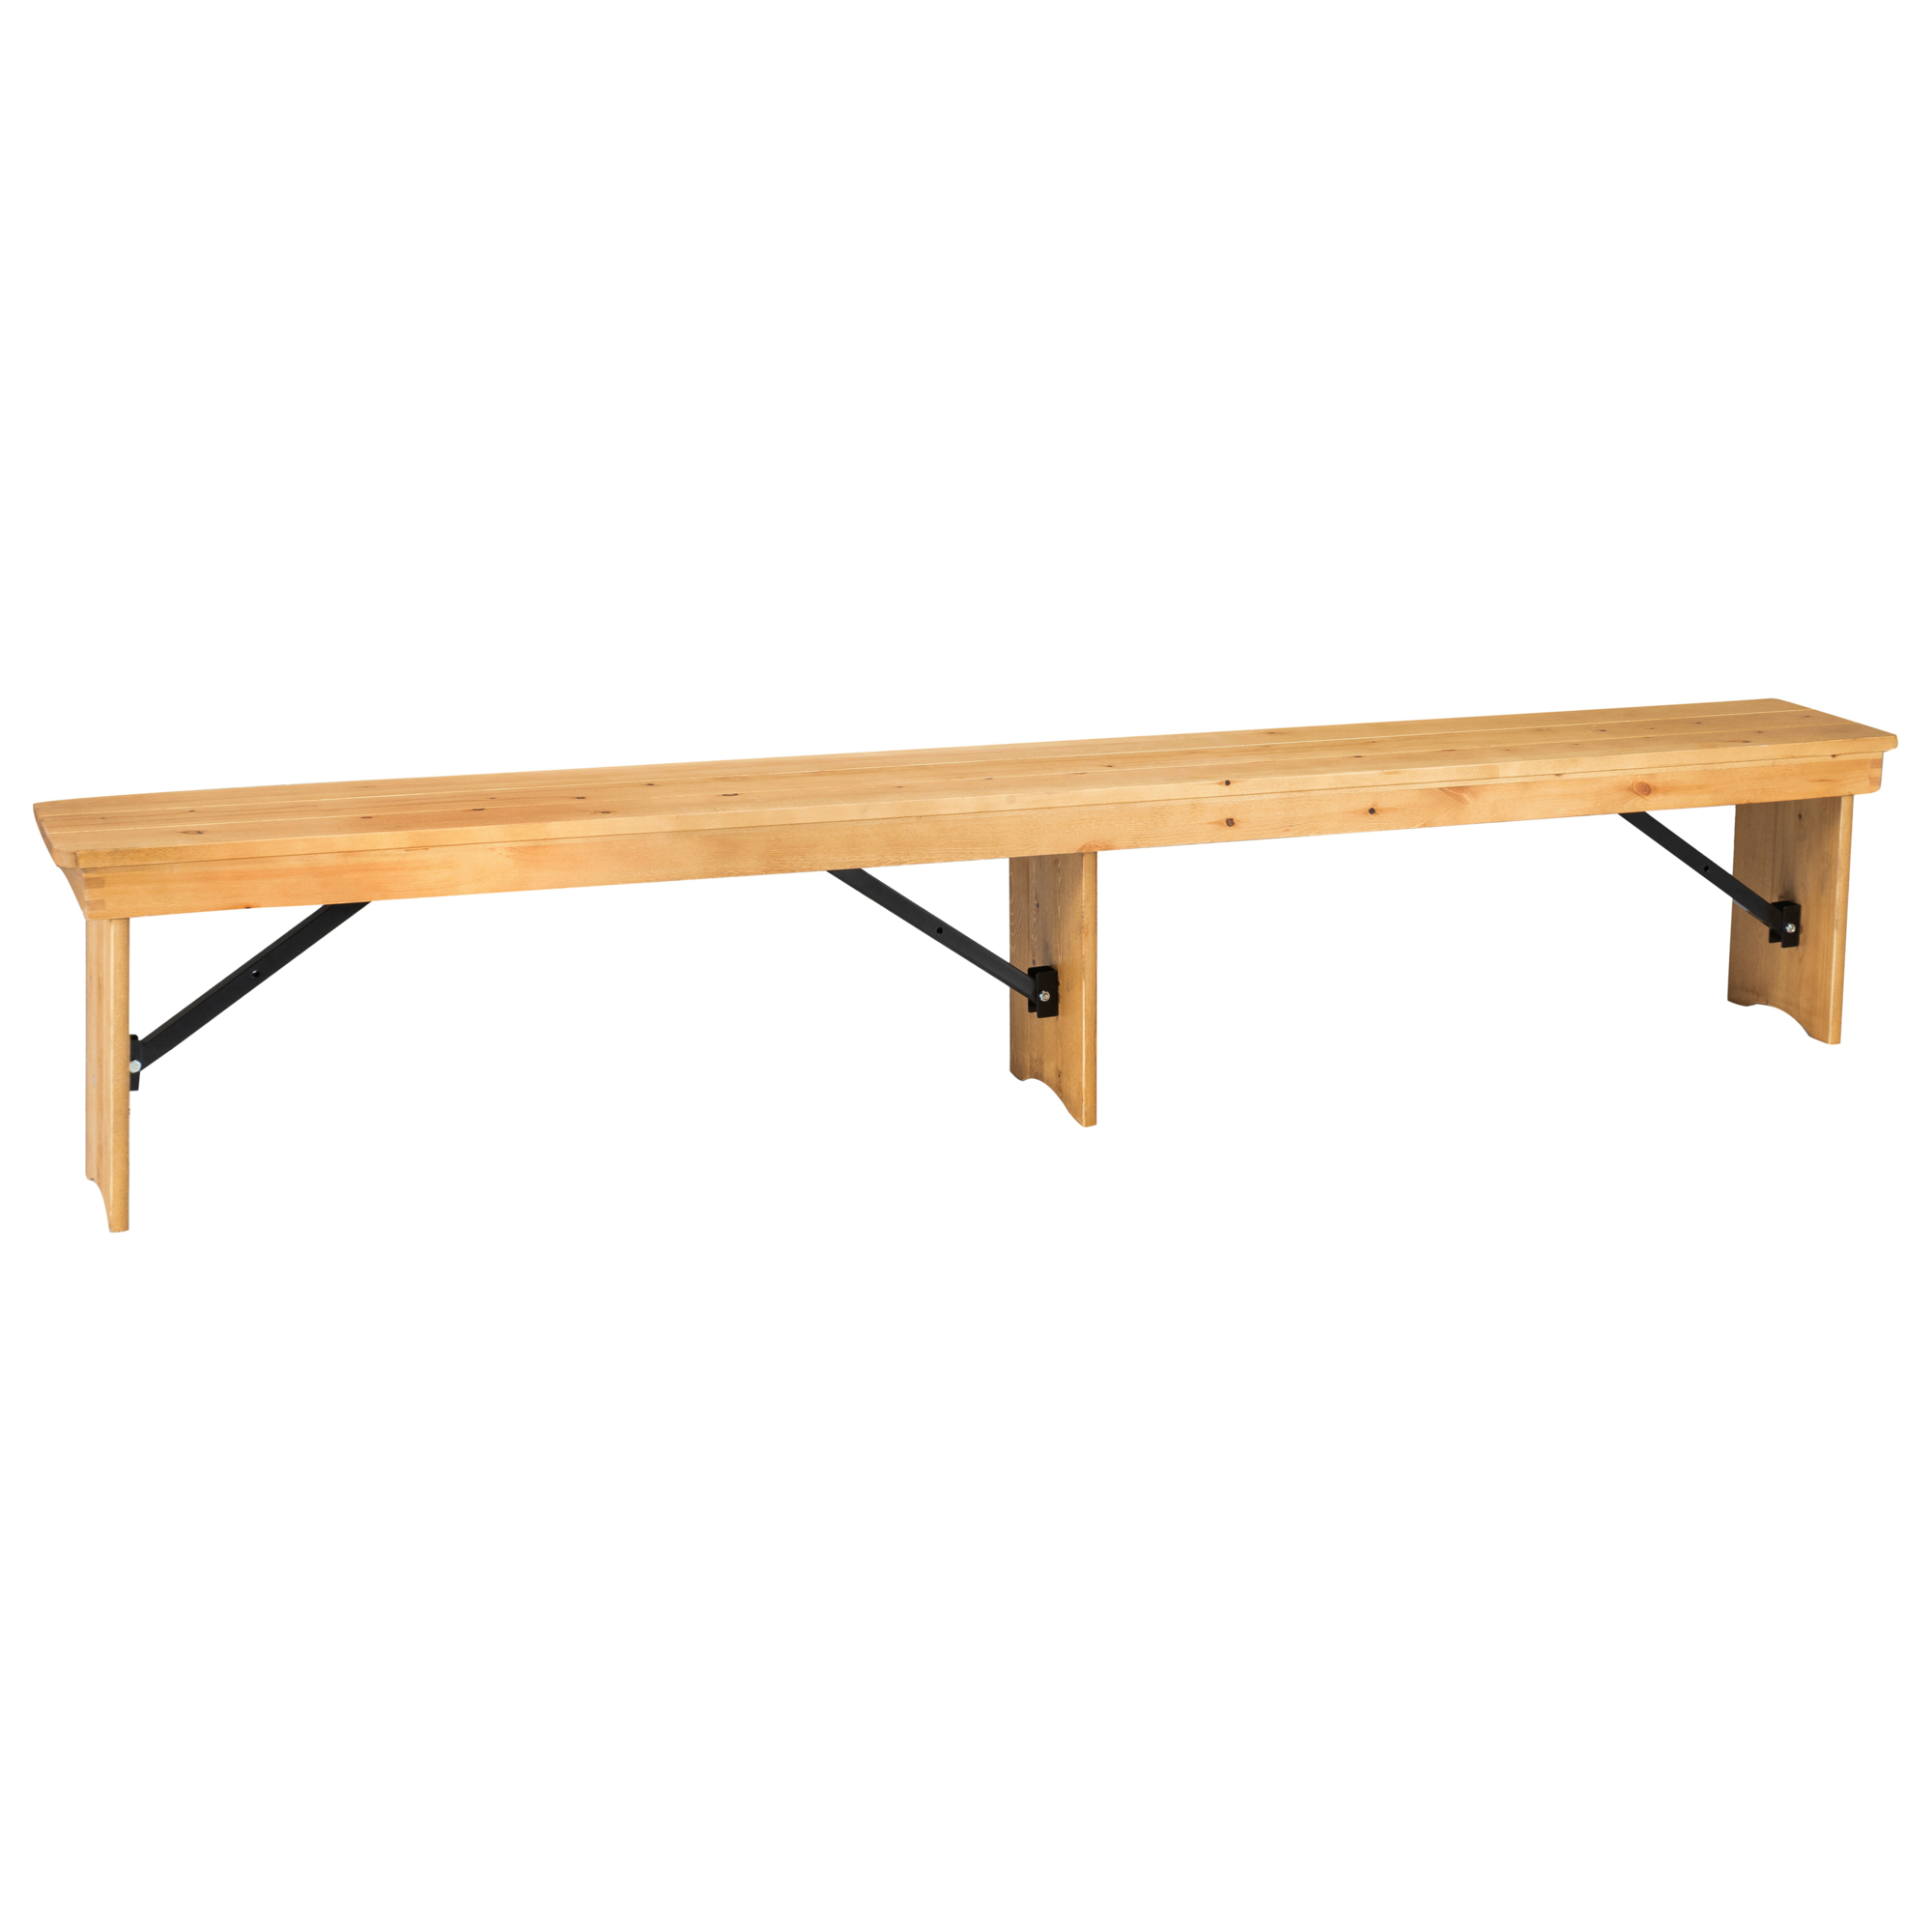 Flash Furniture, 8ft. x 12Inch Light Natural Solid Pine Folding Bench, Primary Color Brown, Included (qty.) 1 Model XAB96X12LLN